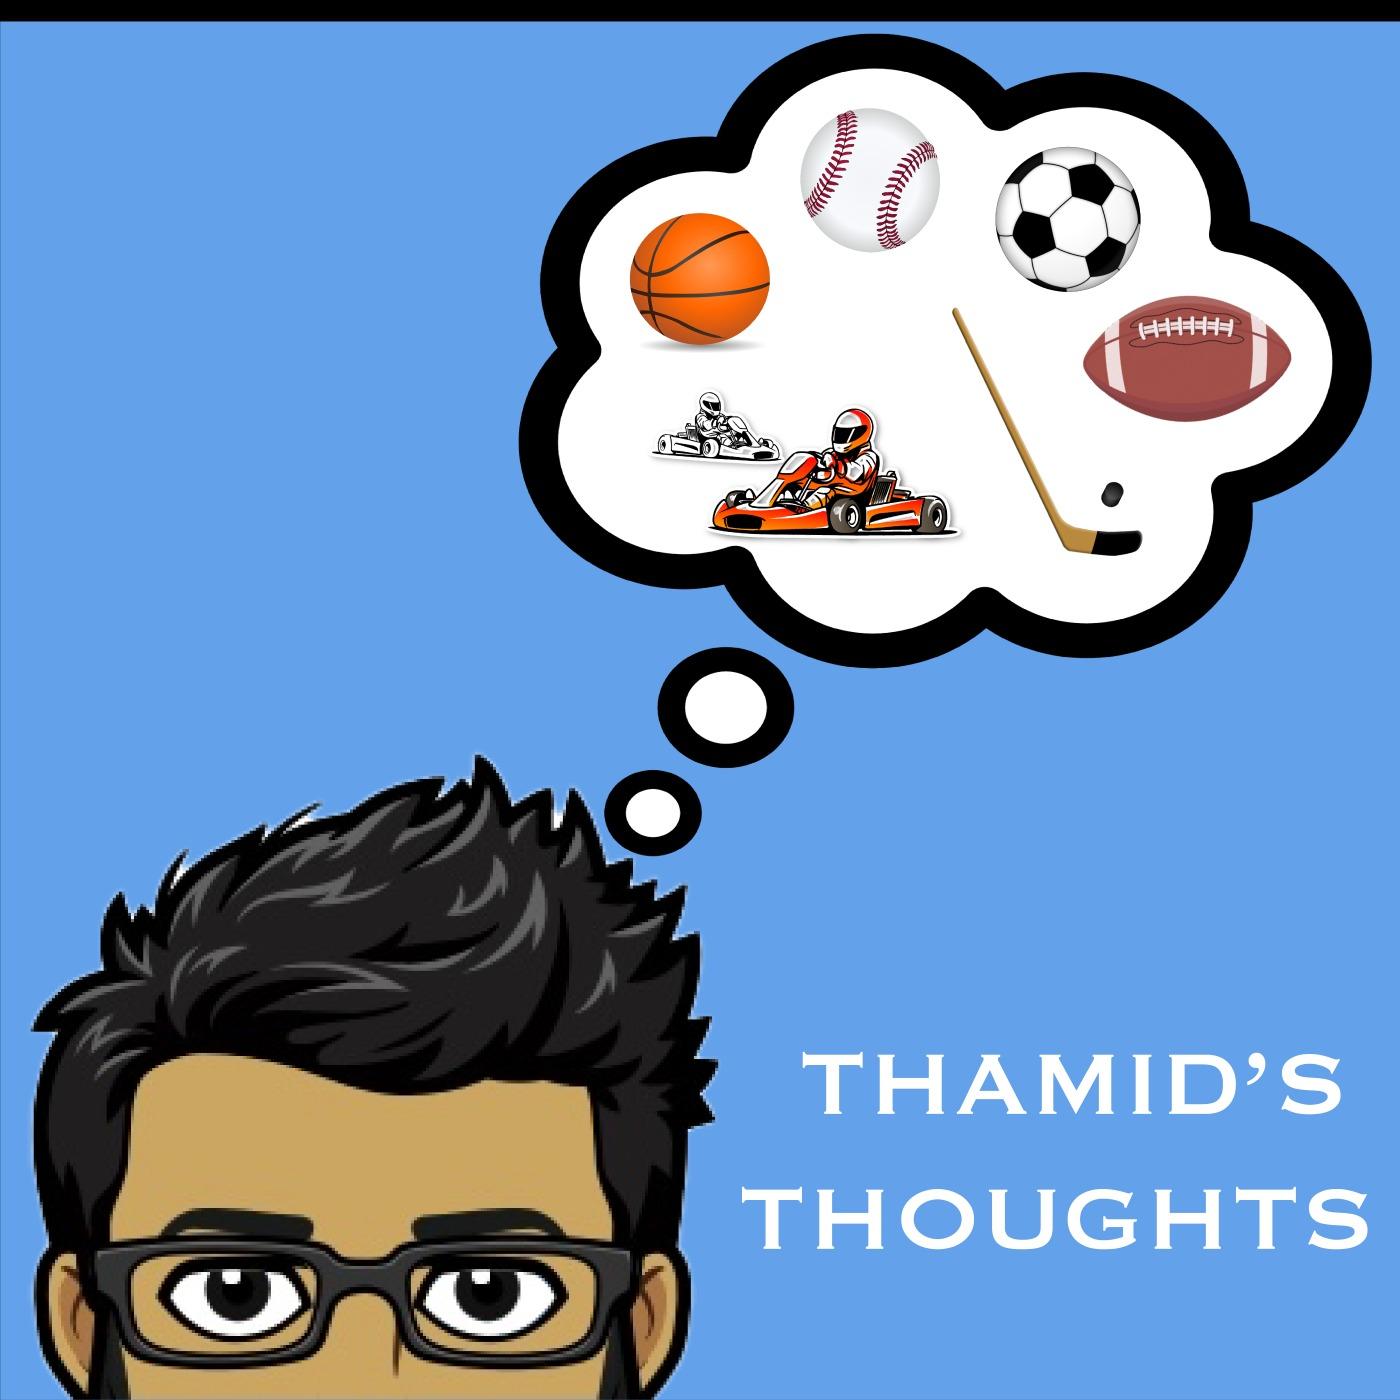 Thamid's Thoughts